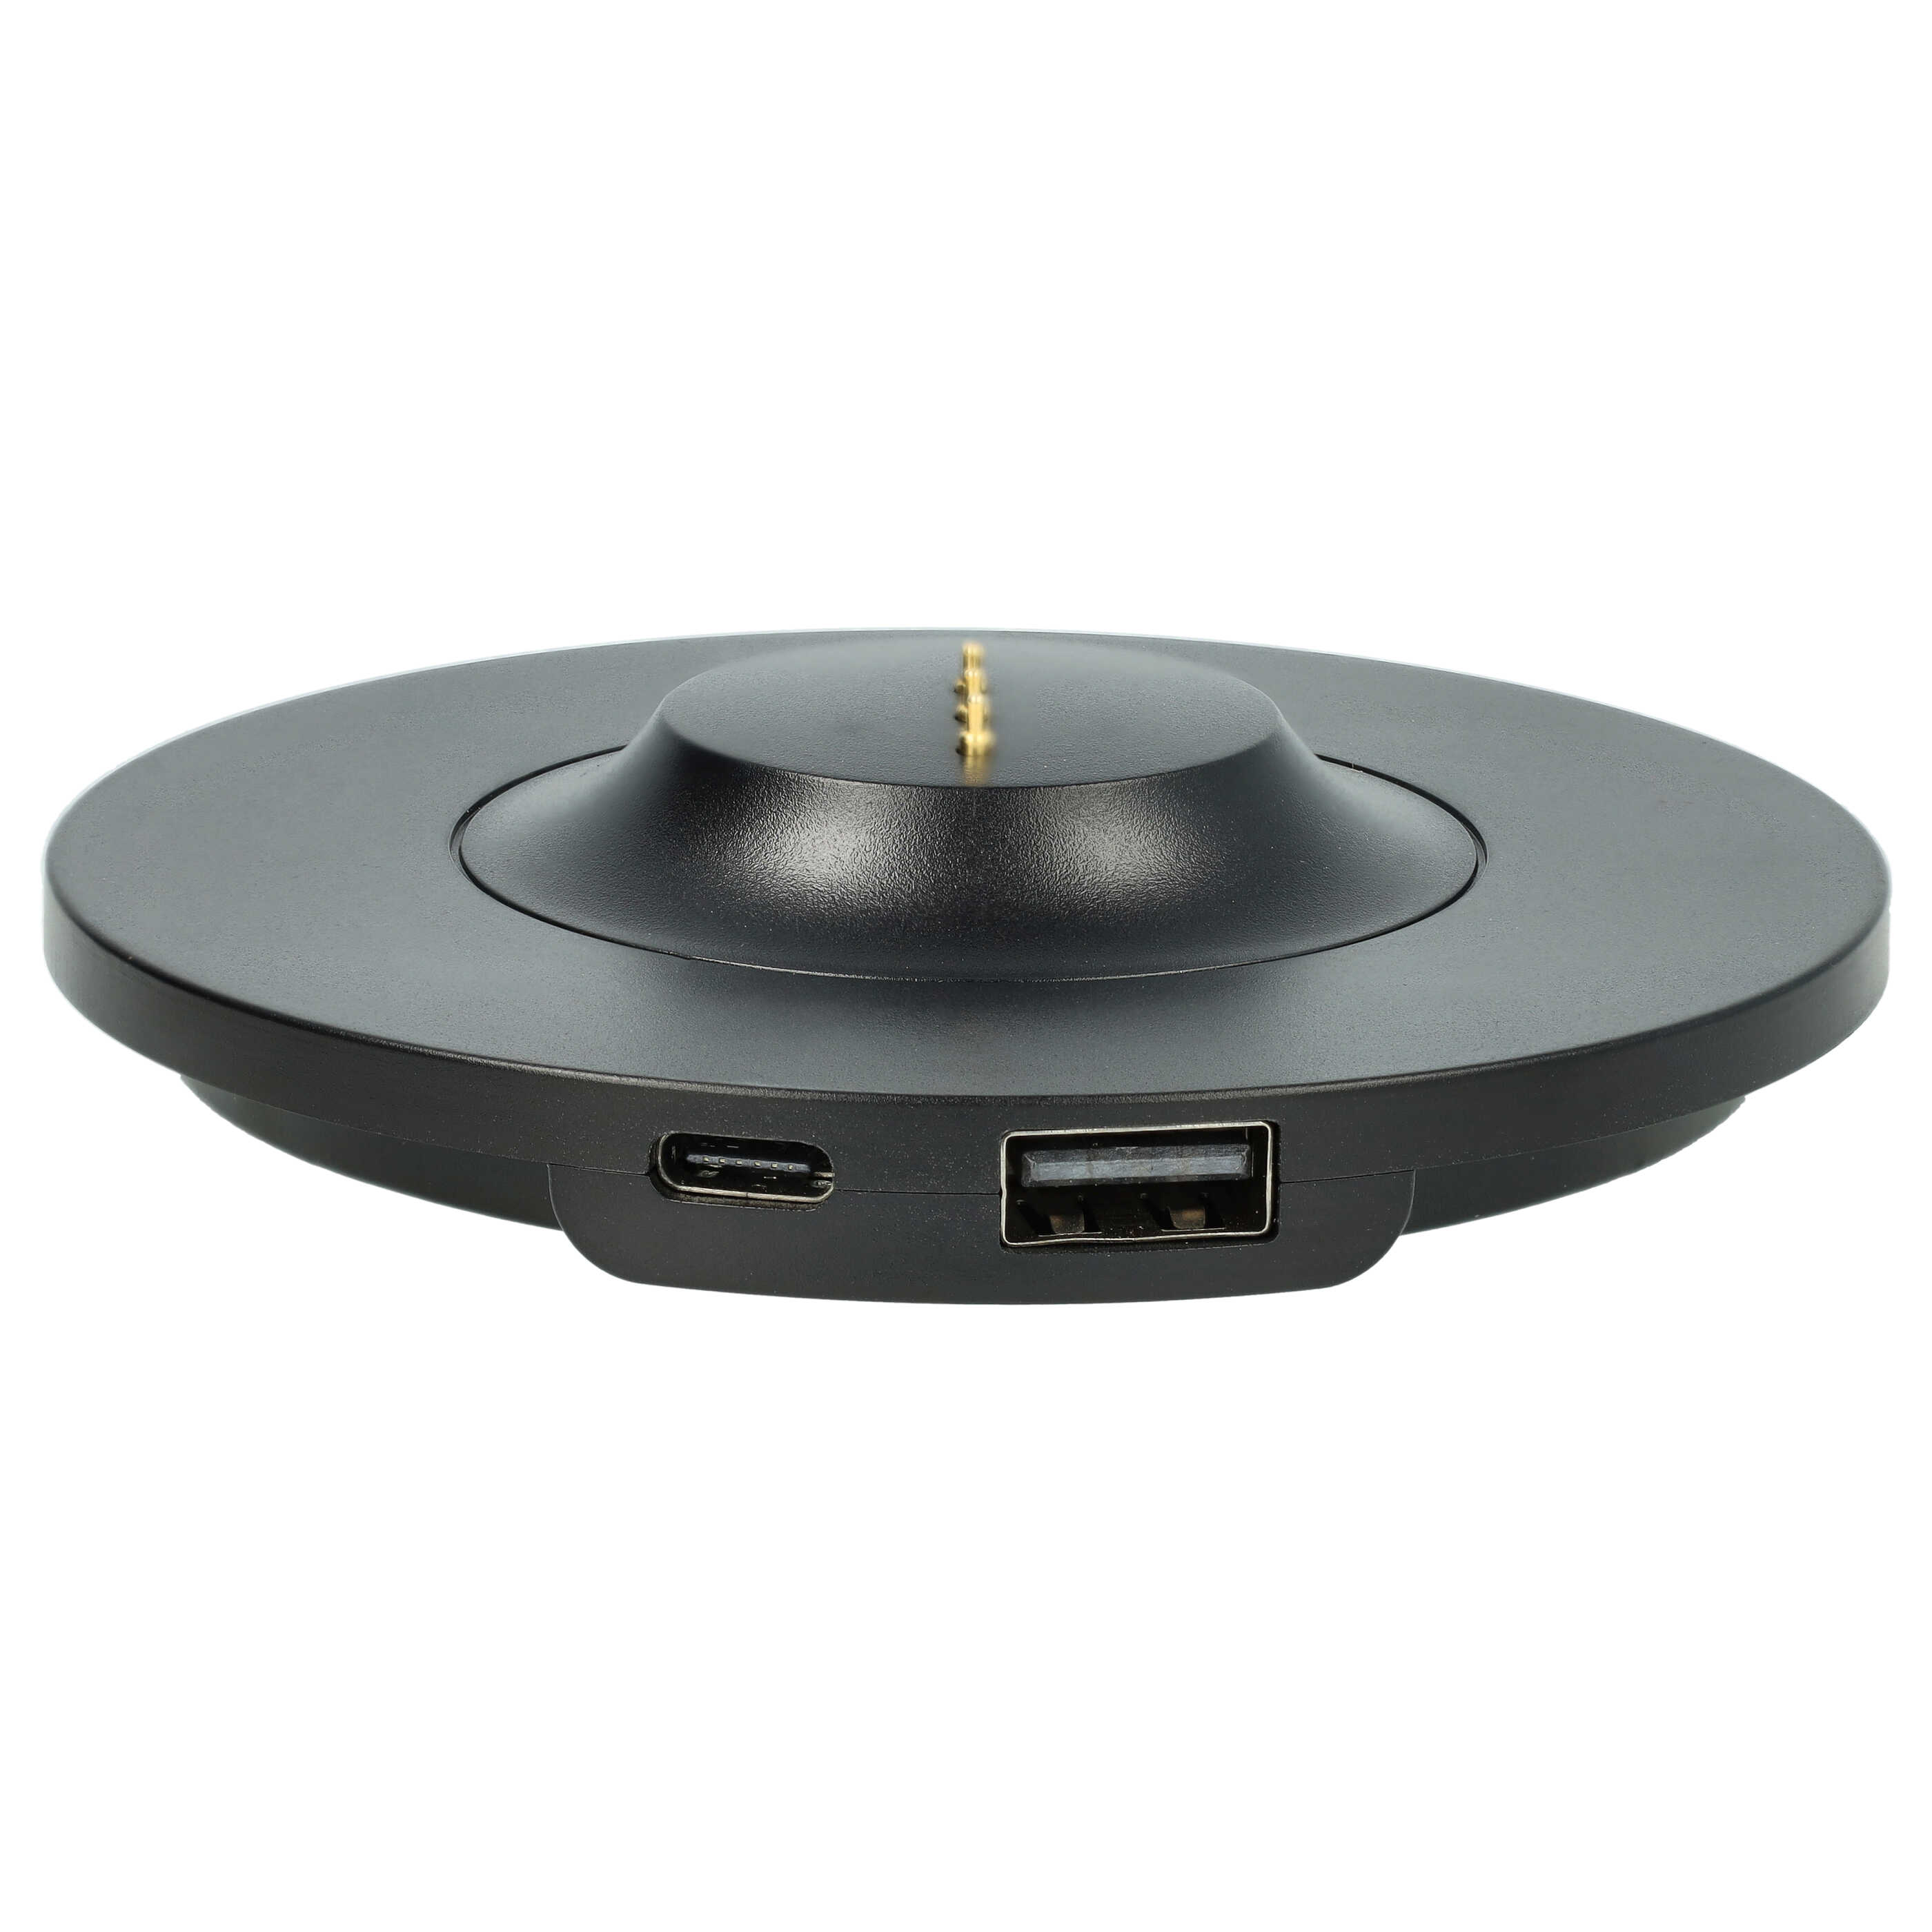 USB Charging Station Suitable for Bose Loudspeakers - Incl. USB C Cable Black